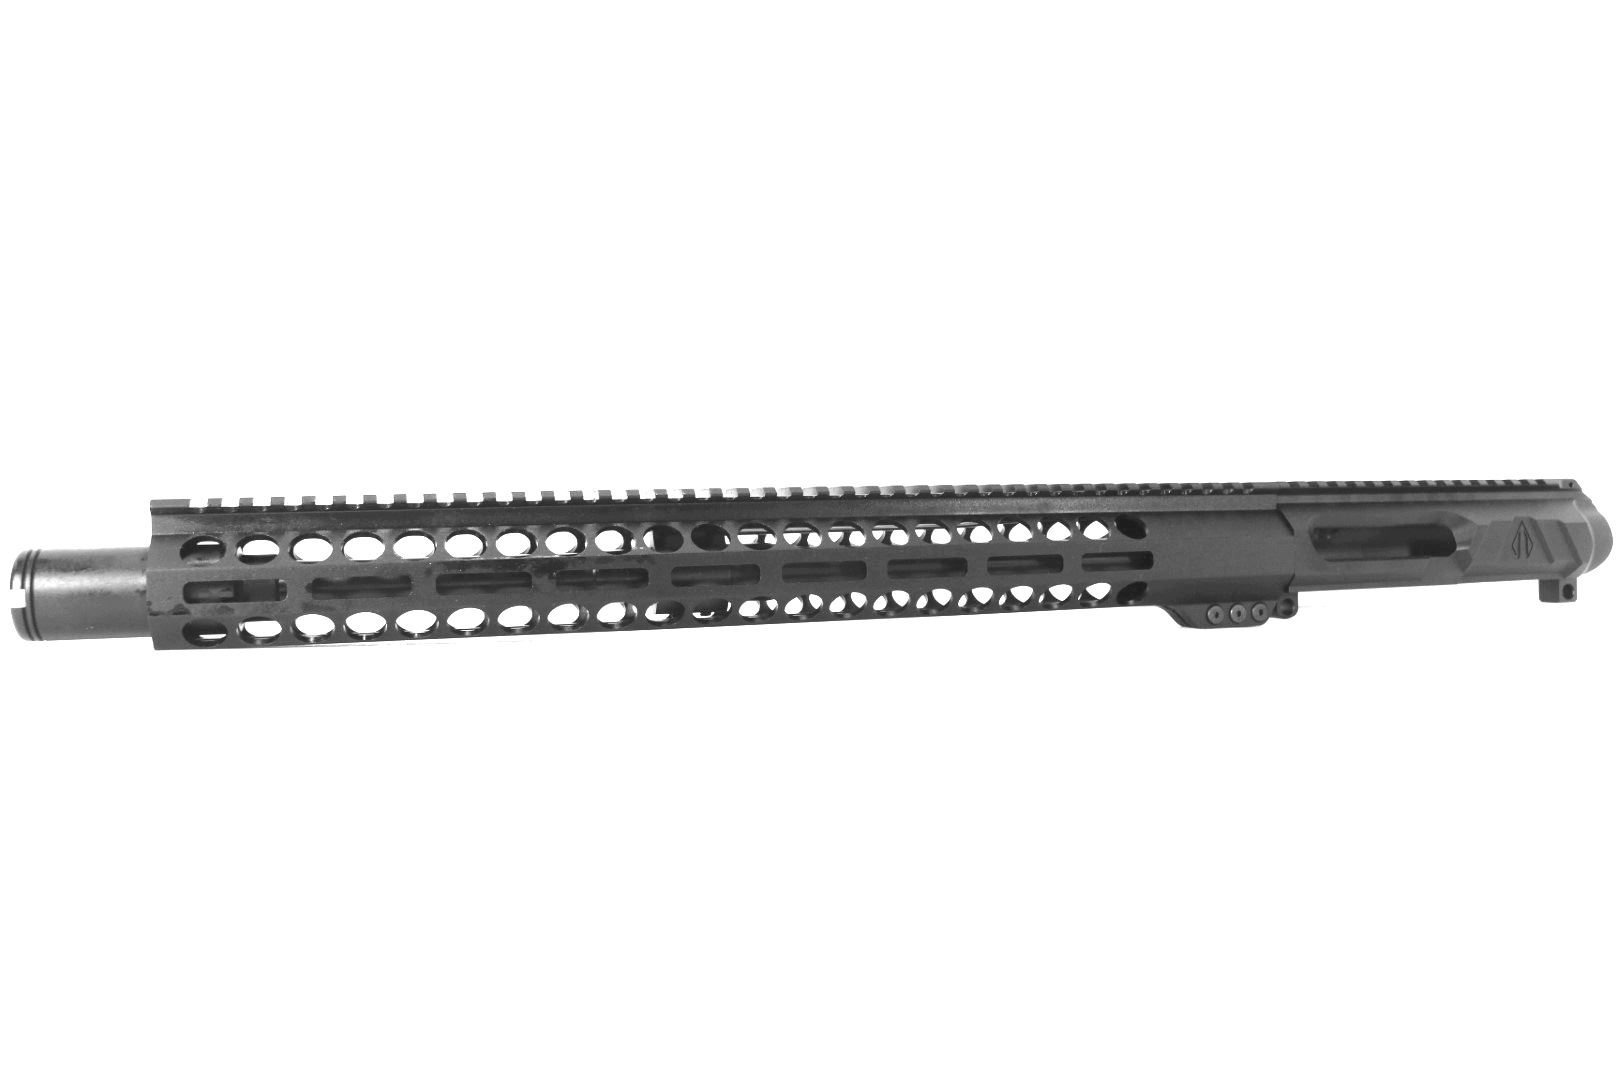 16 inch AR-15 LEFT HANDED AR-15 Non Reciprocating Side Charging 5.56 NATO M-LOK Melonite Upper with Flash Can